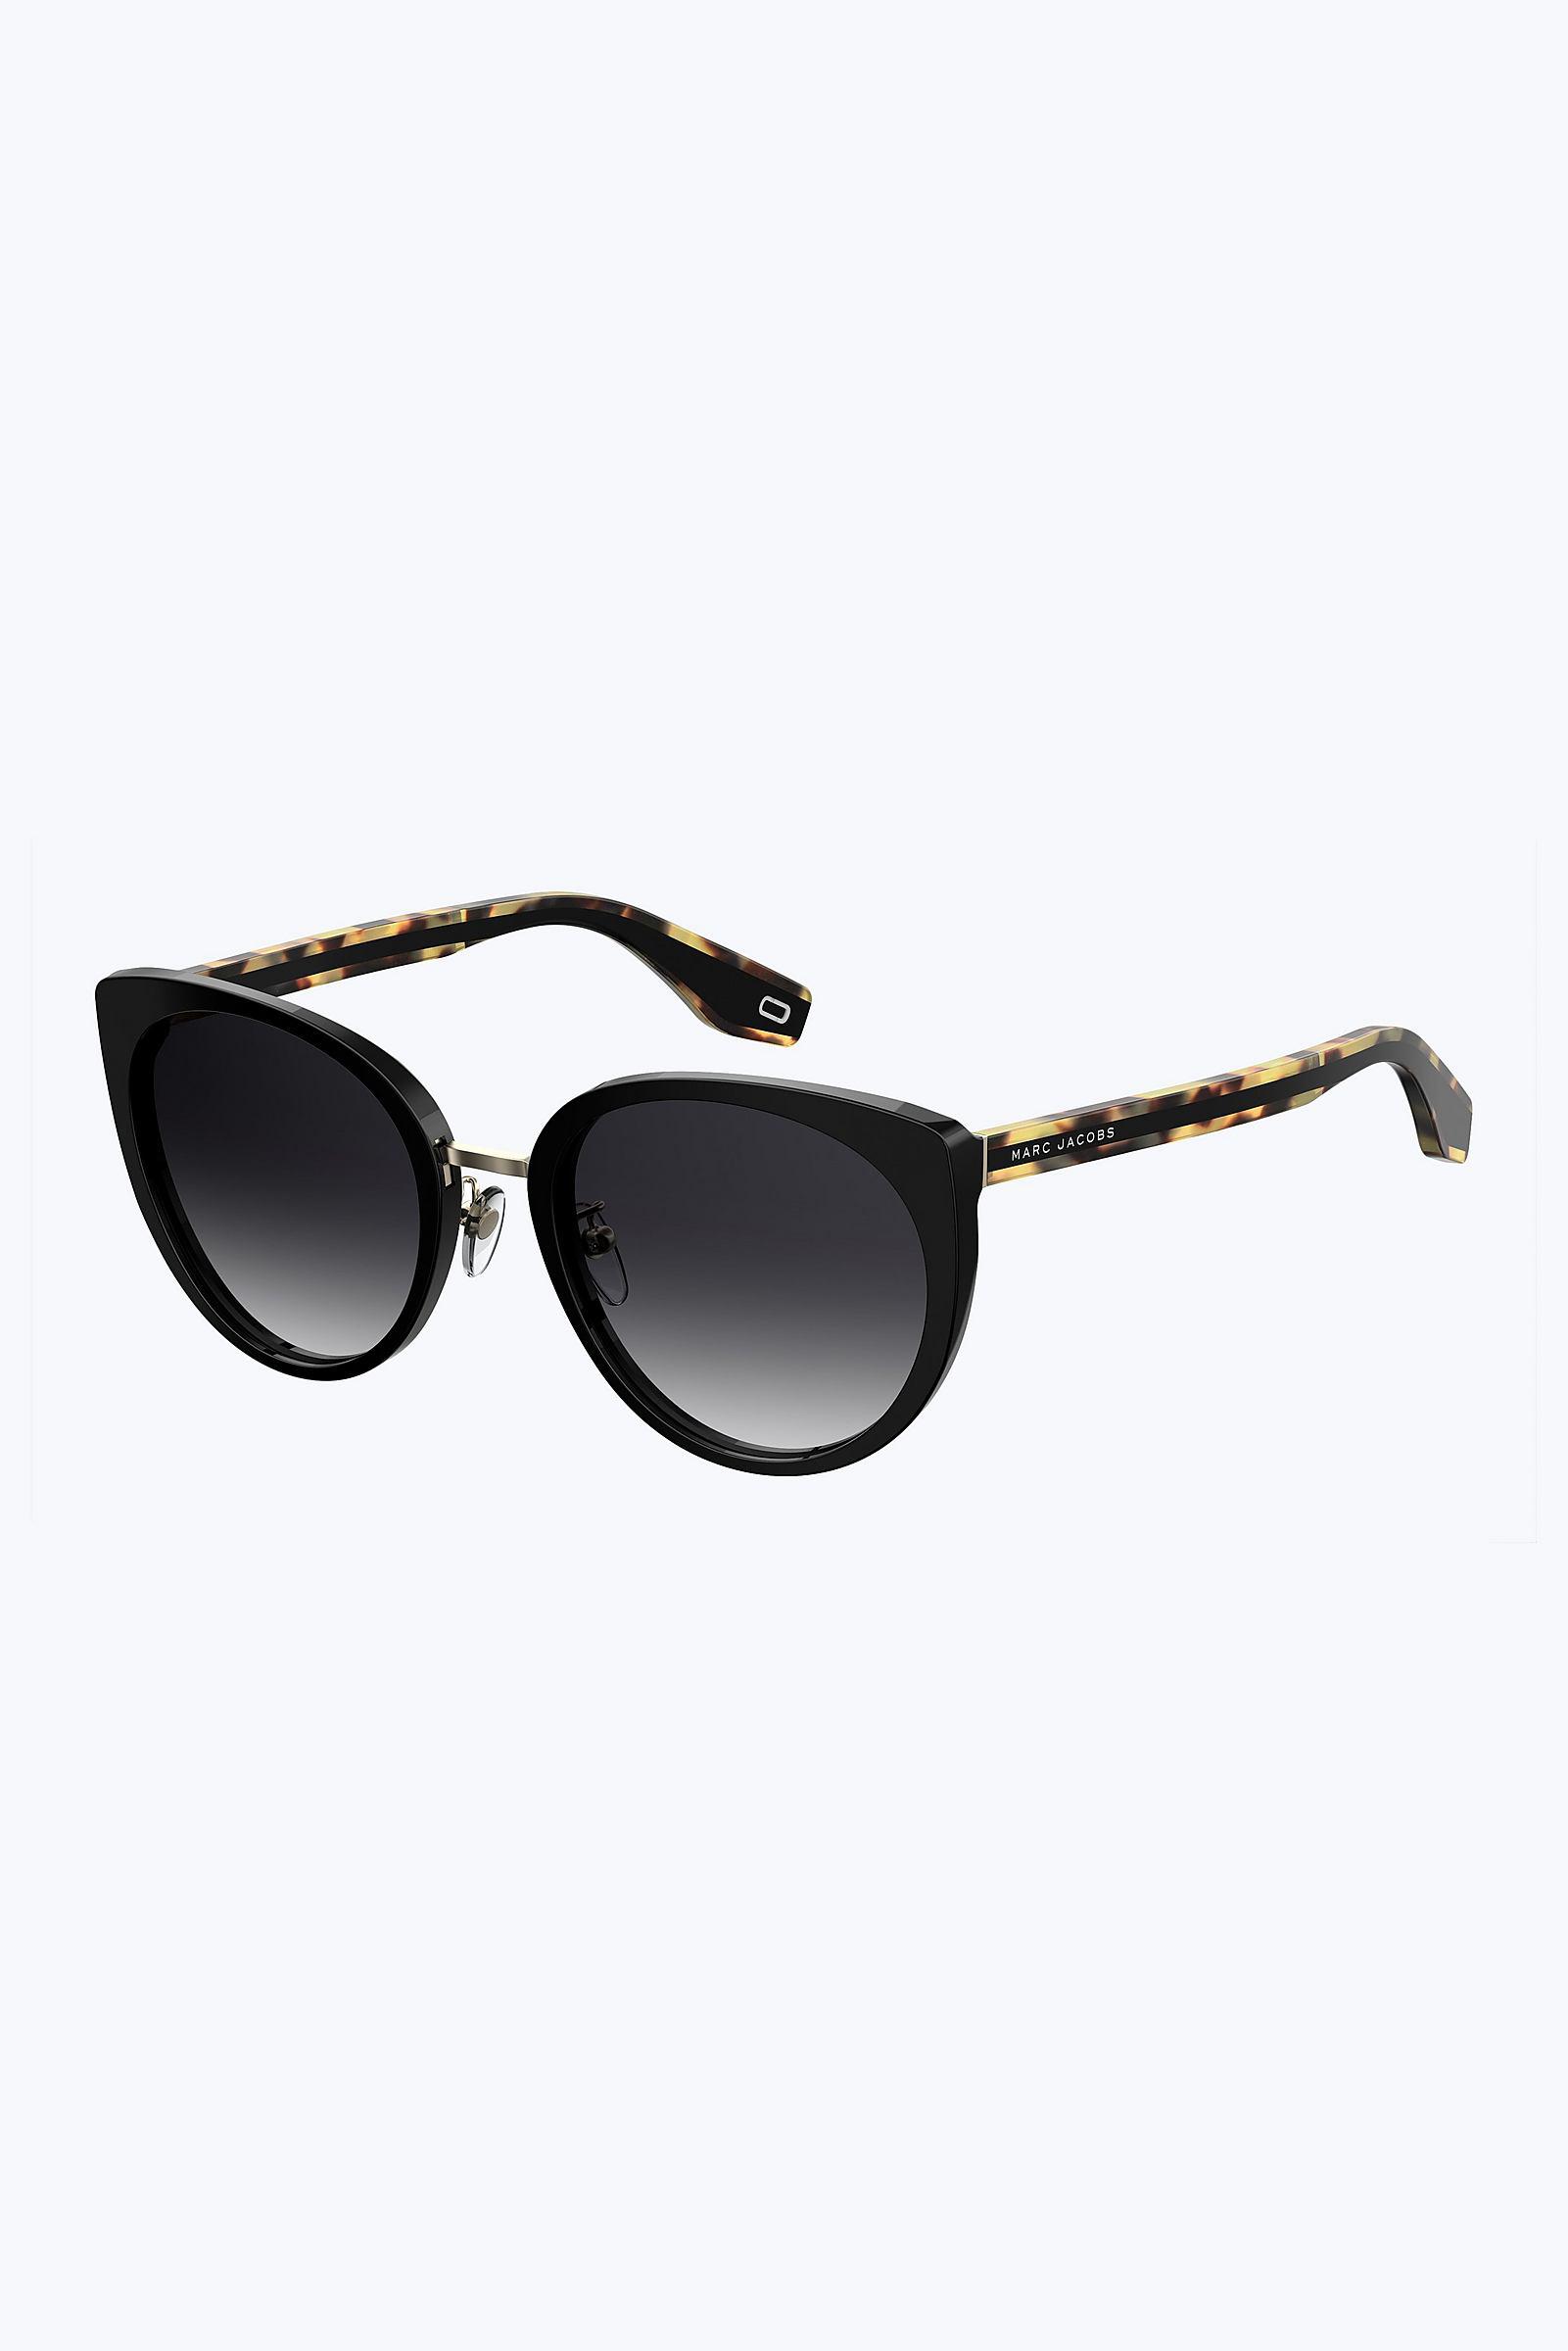 Lyst Marc Jacobs Iconic Stripes Round Sunglasses In Black